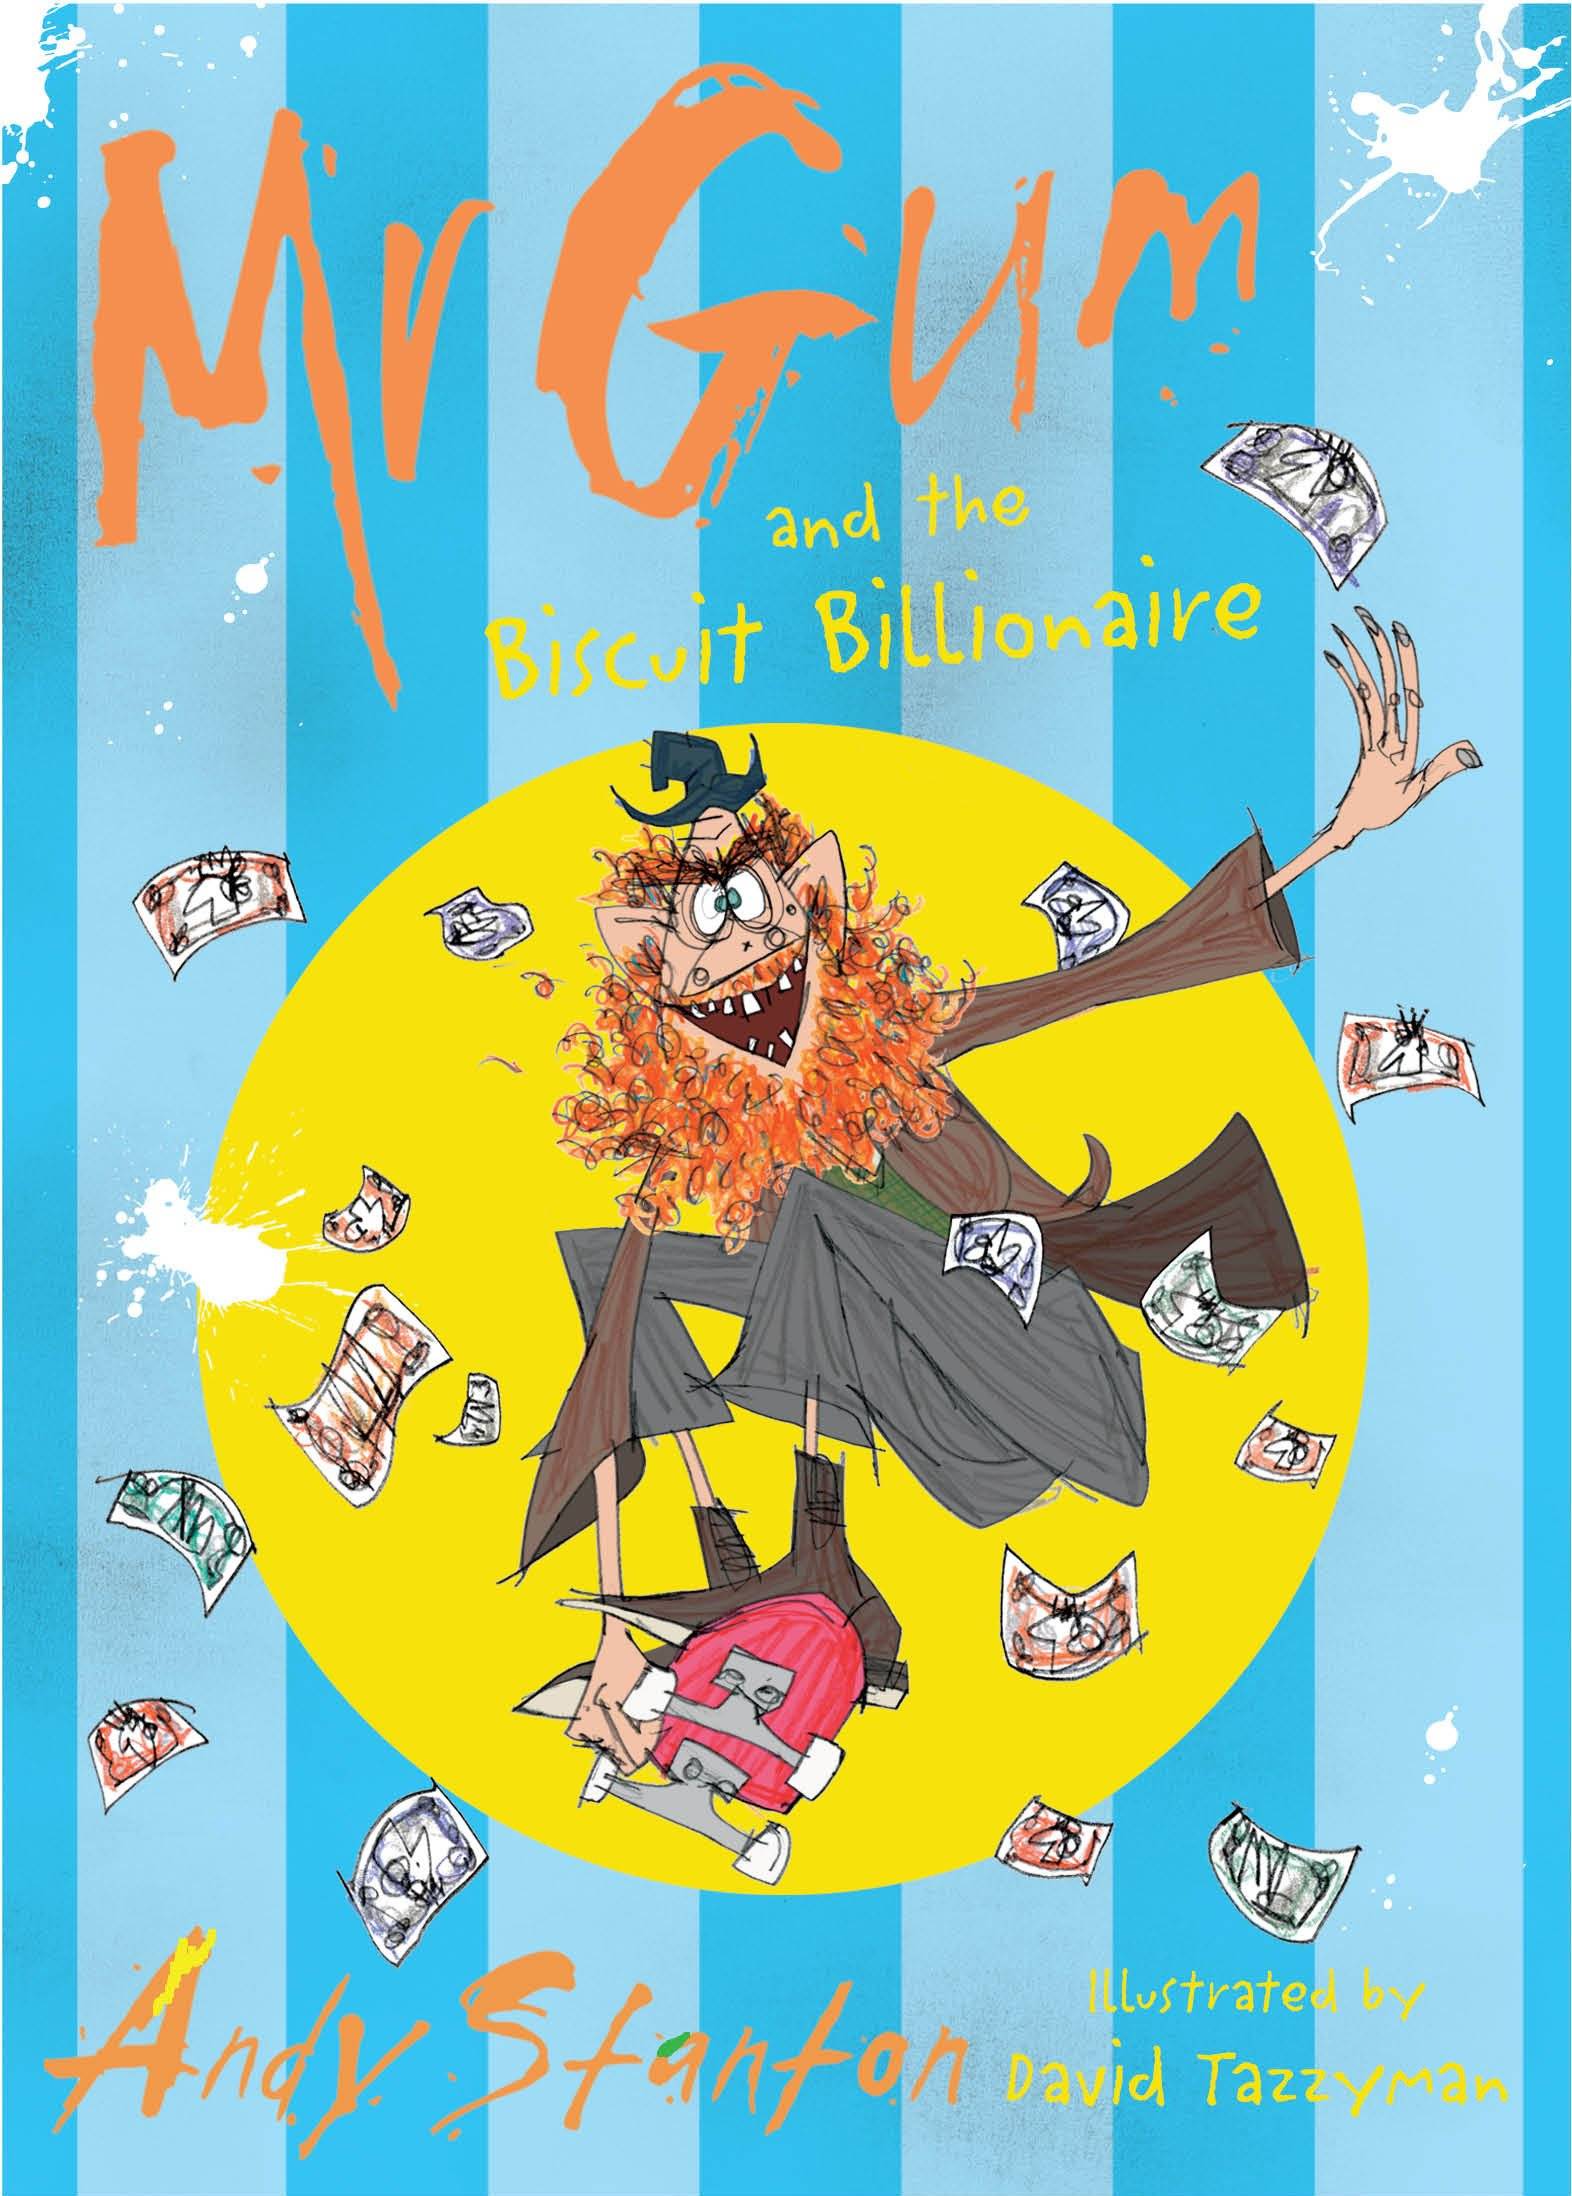 IMG : Mr Gum and the Biscuit Billionaire